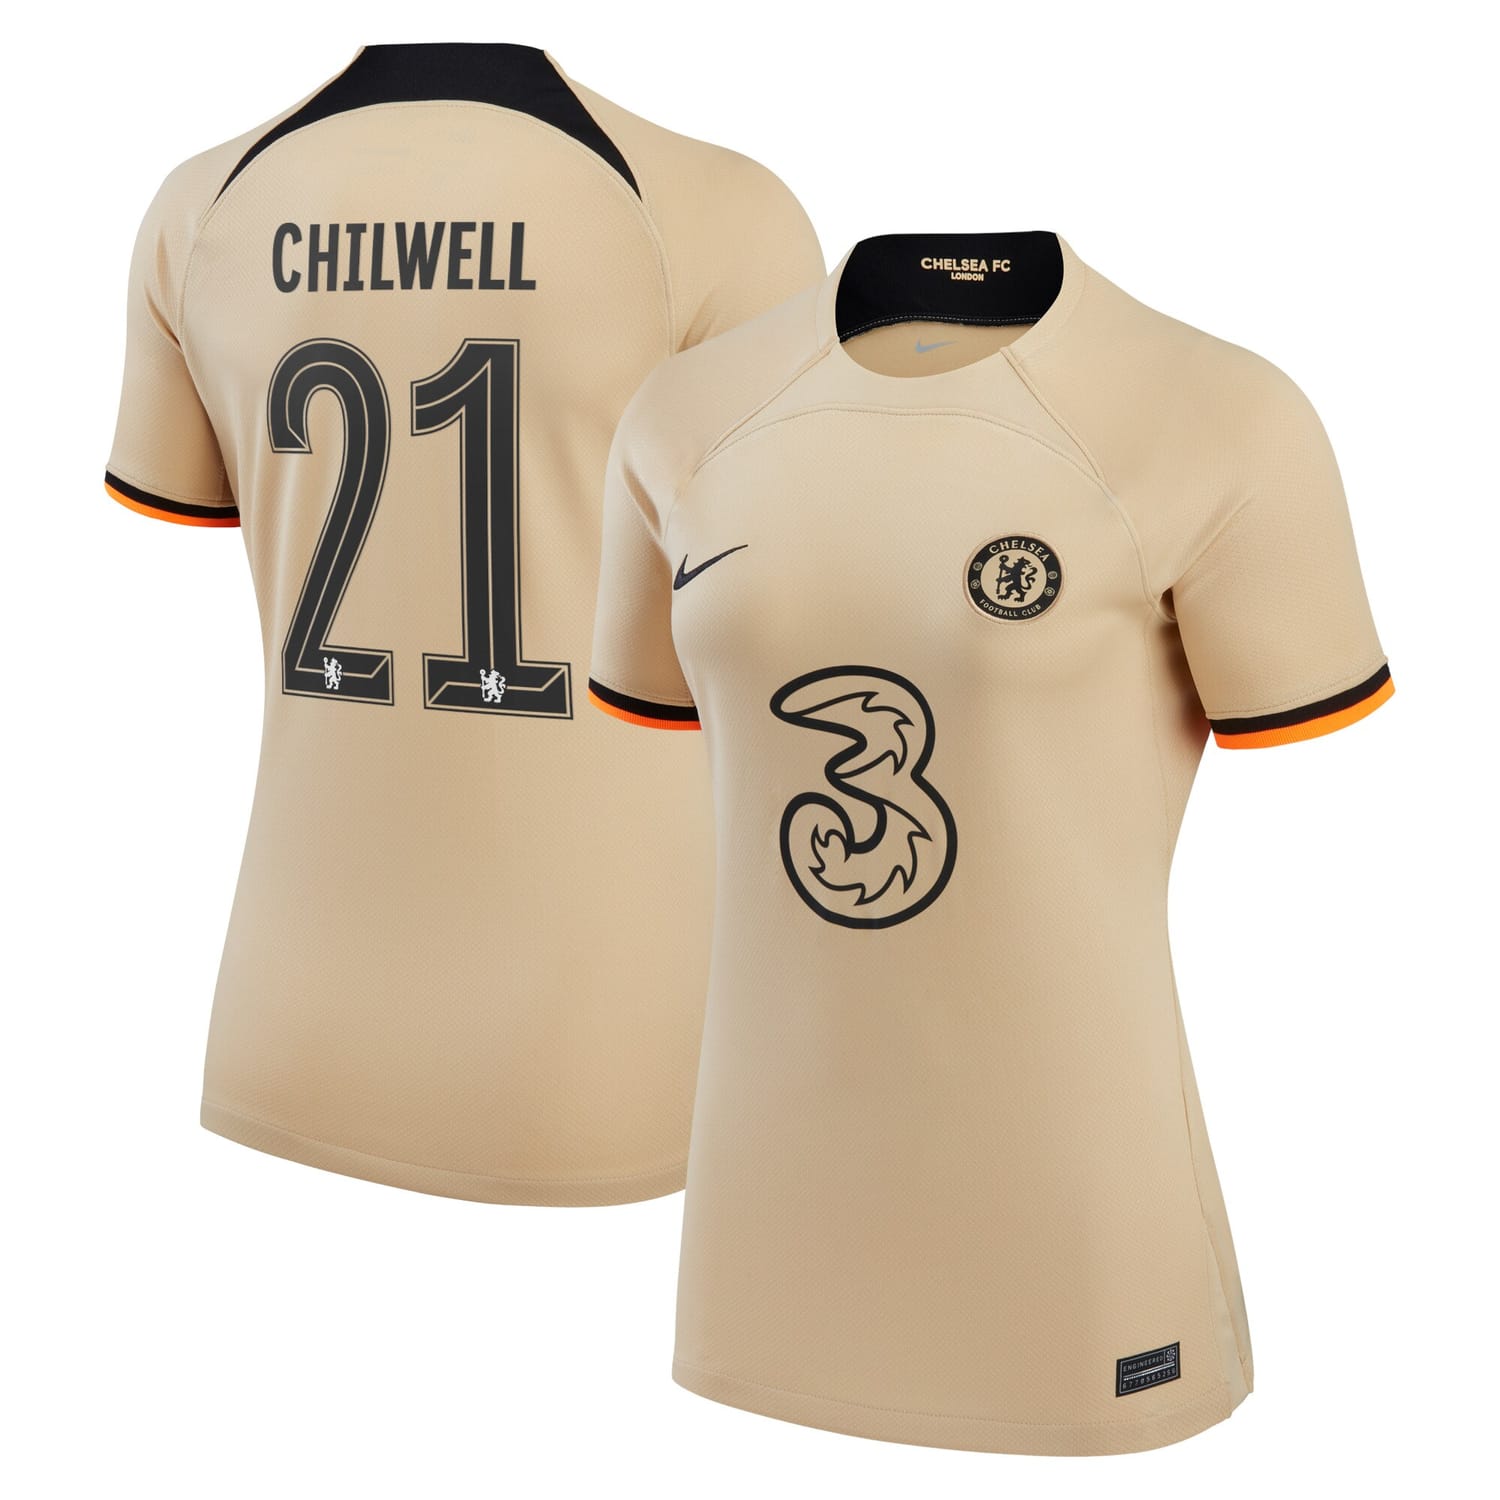 Premier League Chelsea Third Cup Jersey Shirt 2022-23 player Ben Chilwell 21 printing for Women